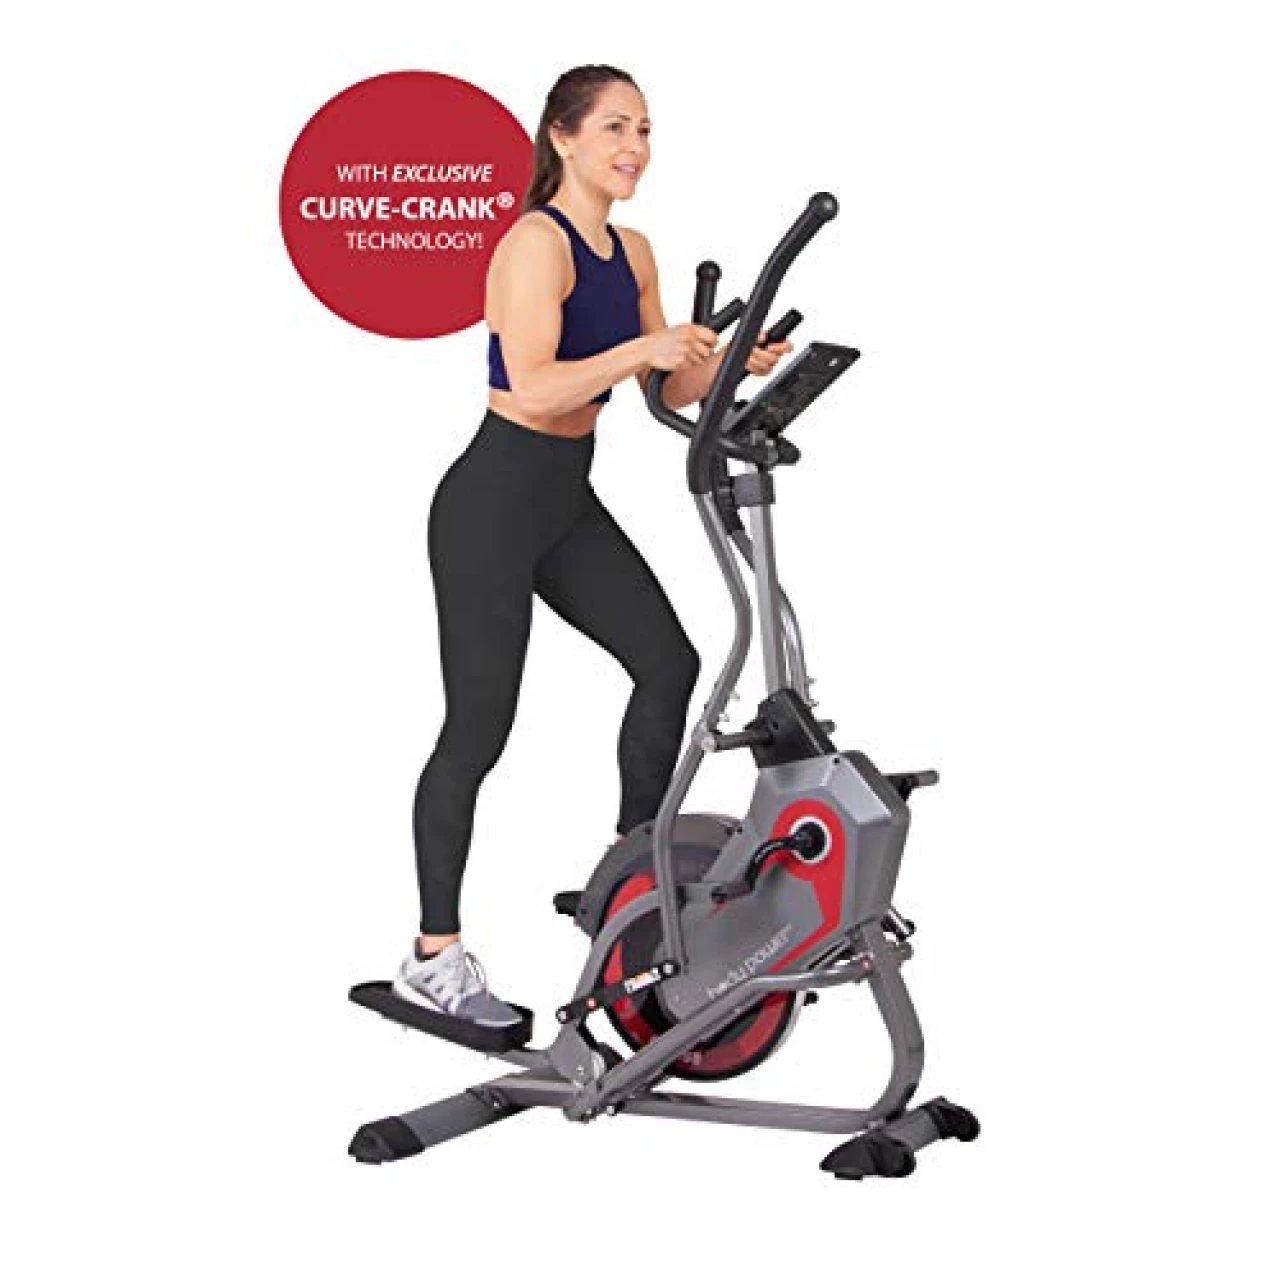 [BODY POWER] - Patented 2 in 1 Elliptical Machine &amp; Stair Stepper Trainer